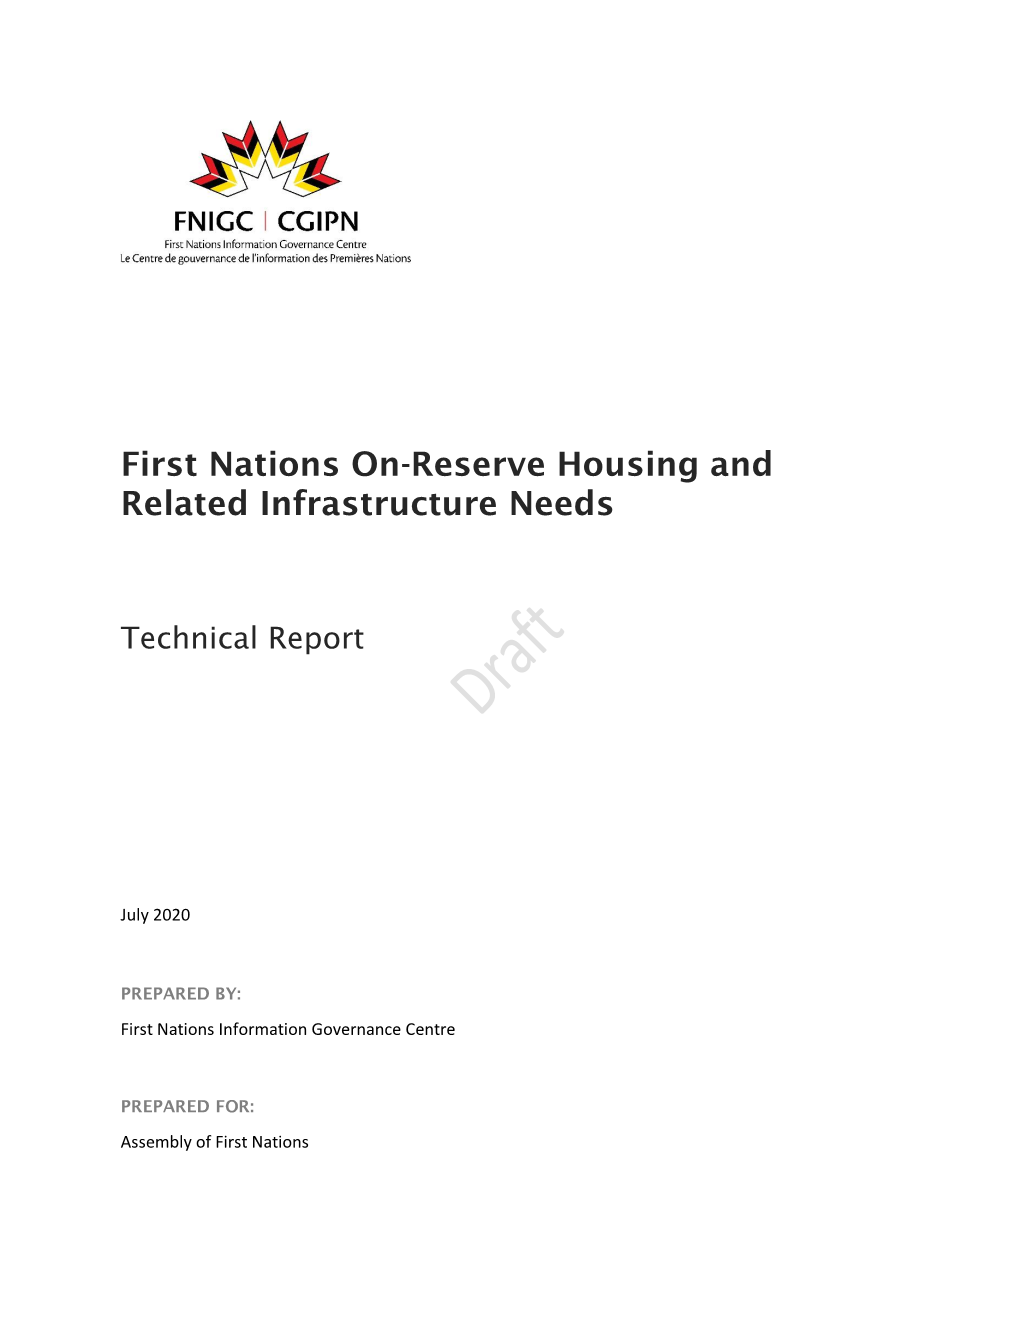 First Nations On-Reserve Housing and Related Infrastructure Needs